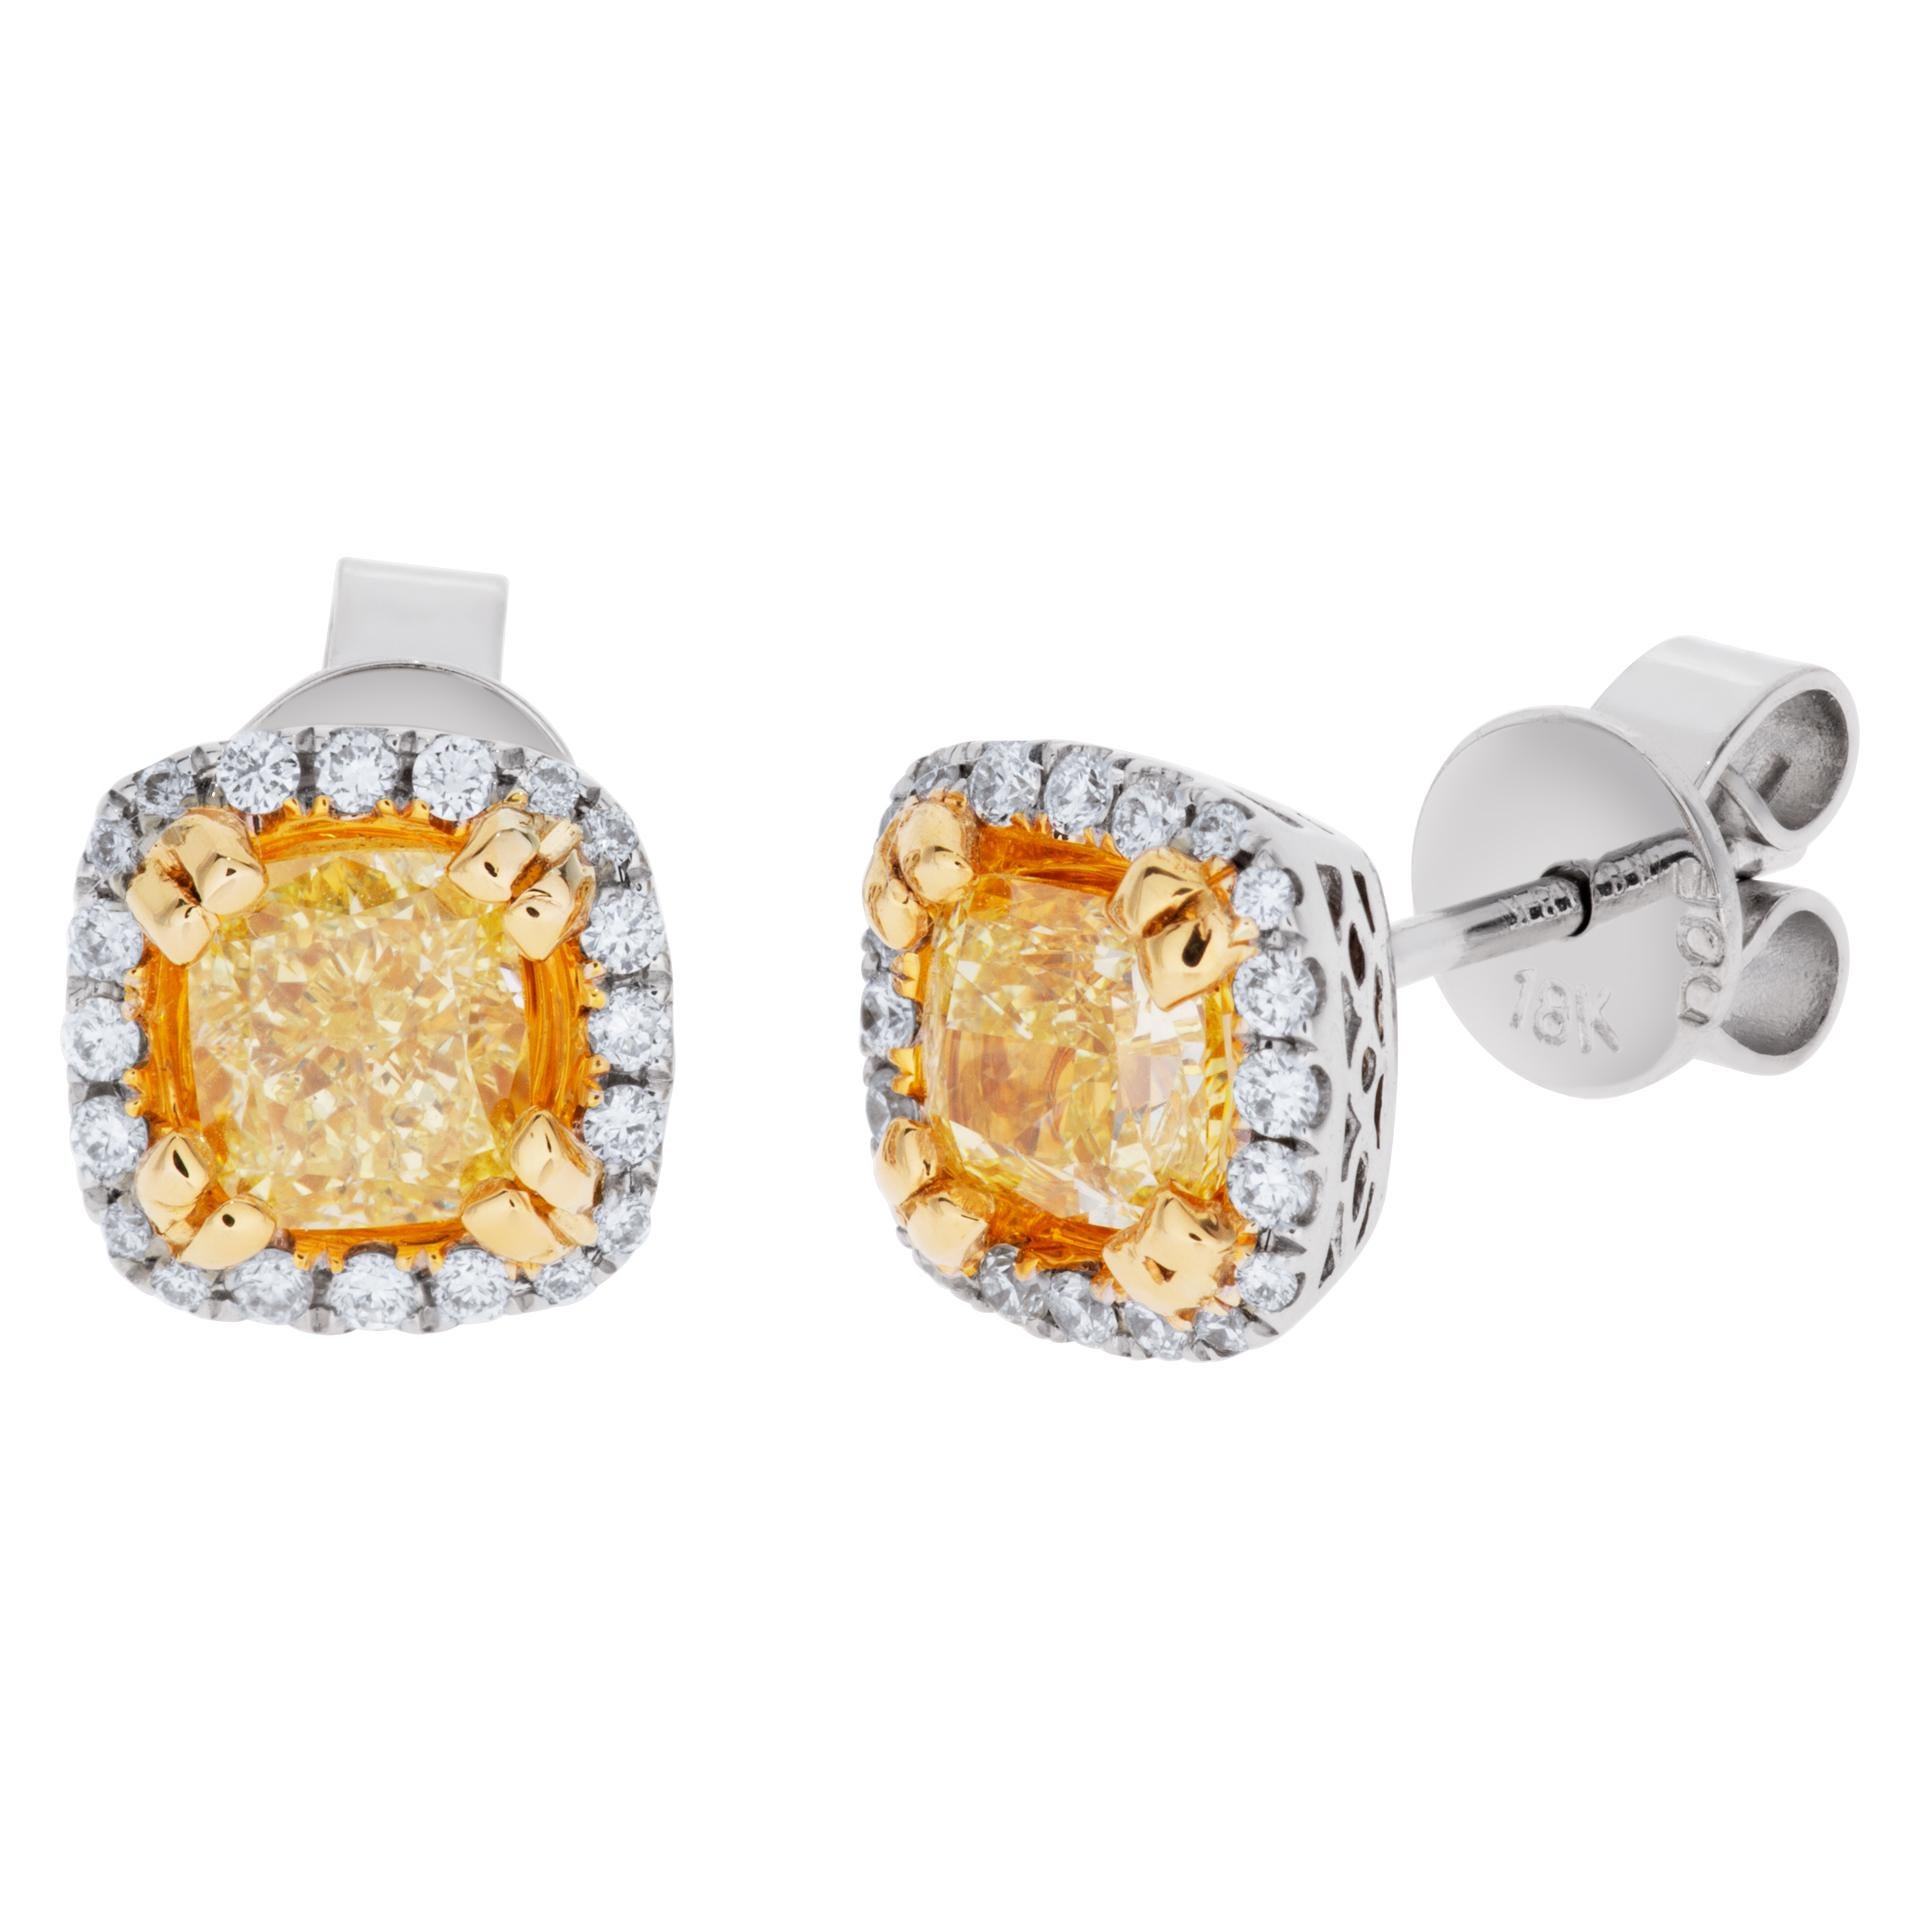 Yellow diamond stud earrings in 18k white and yellow gold, approximately 0.16 carat in white diamonds and 1.05 carats in yellow diamonds. Size 7.4mm x 7.4mm.
